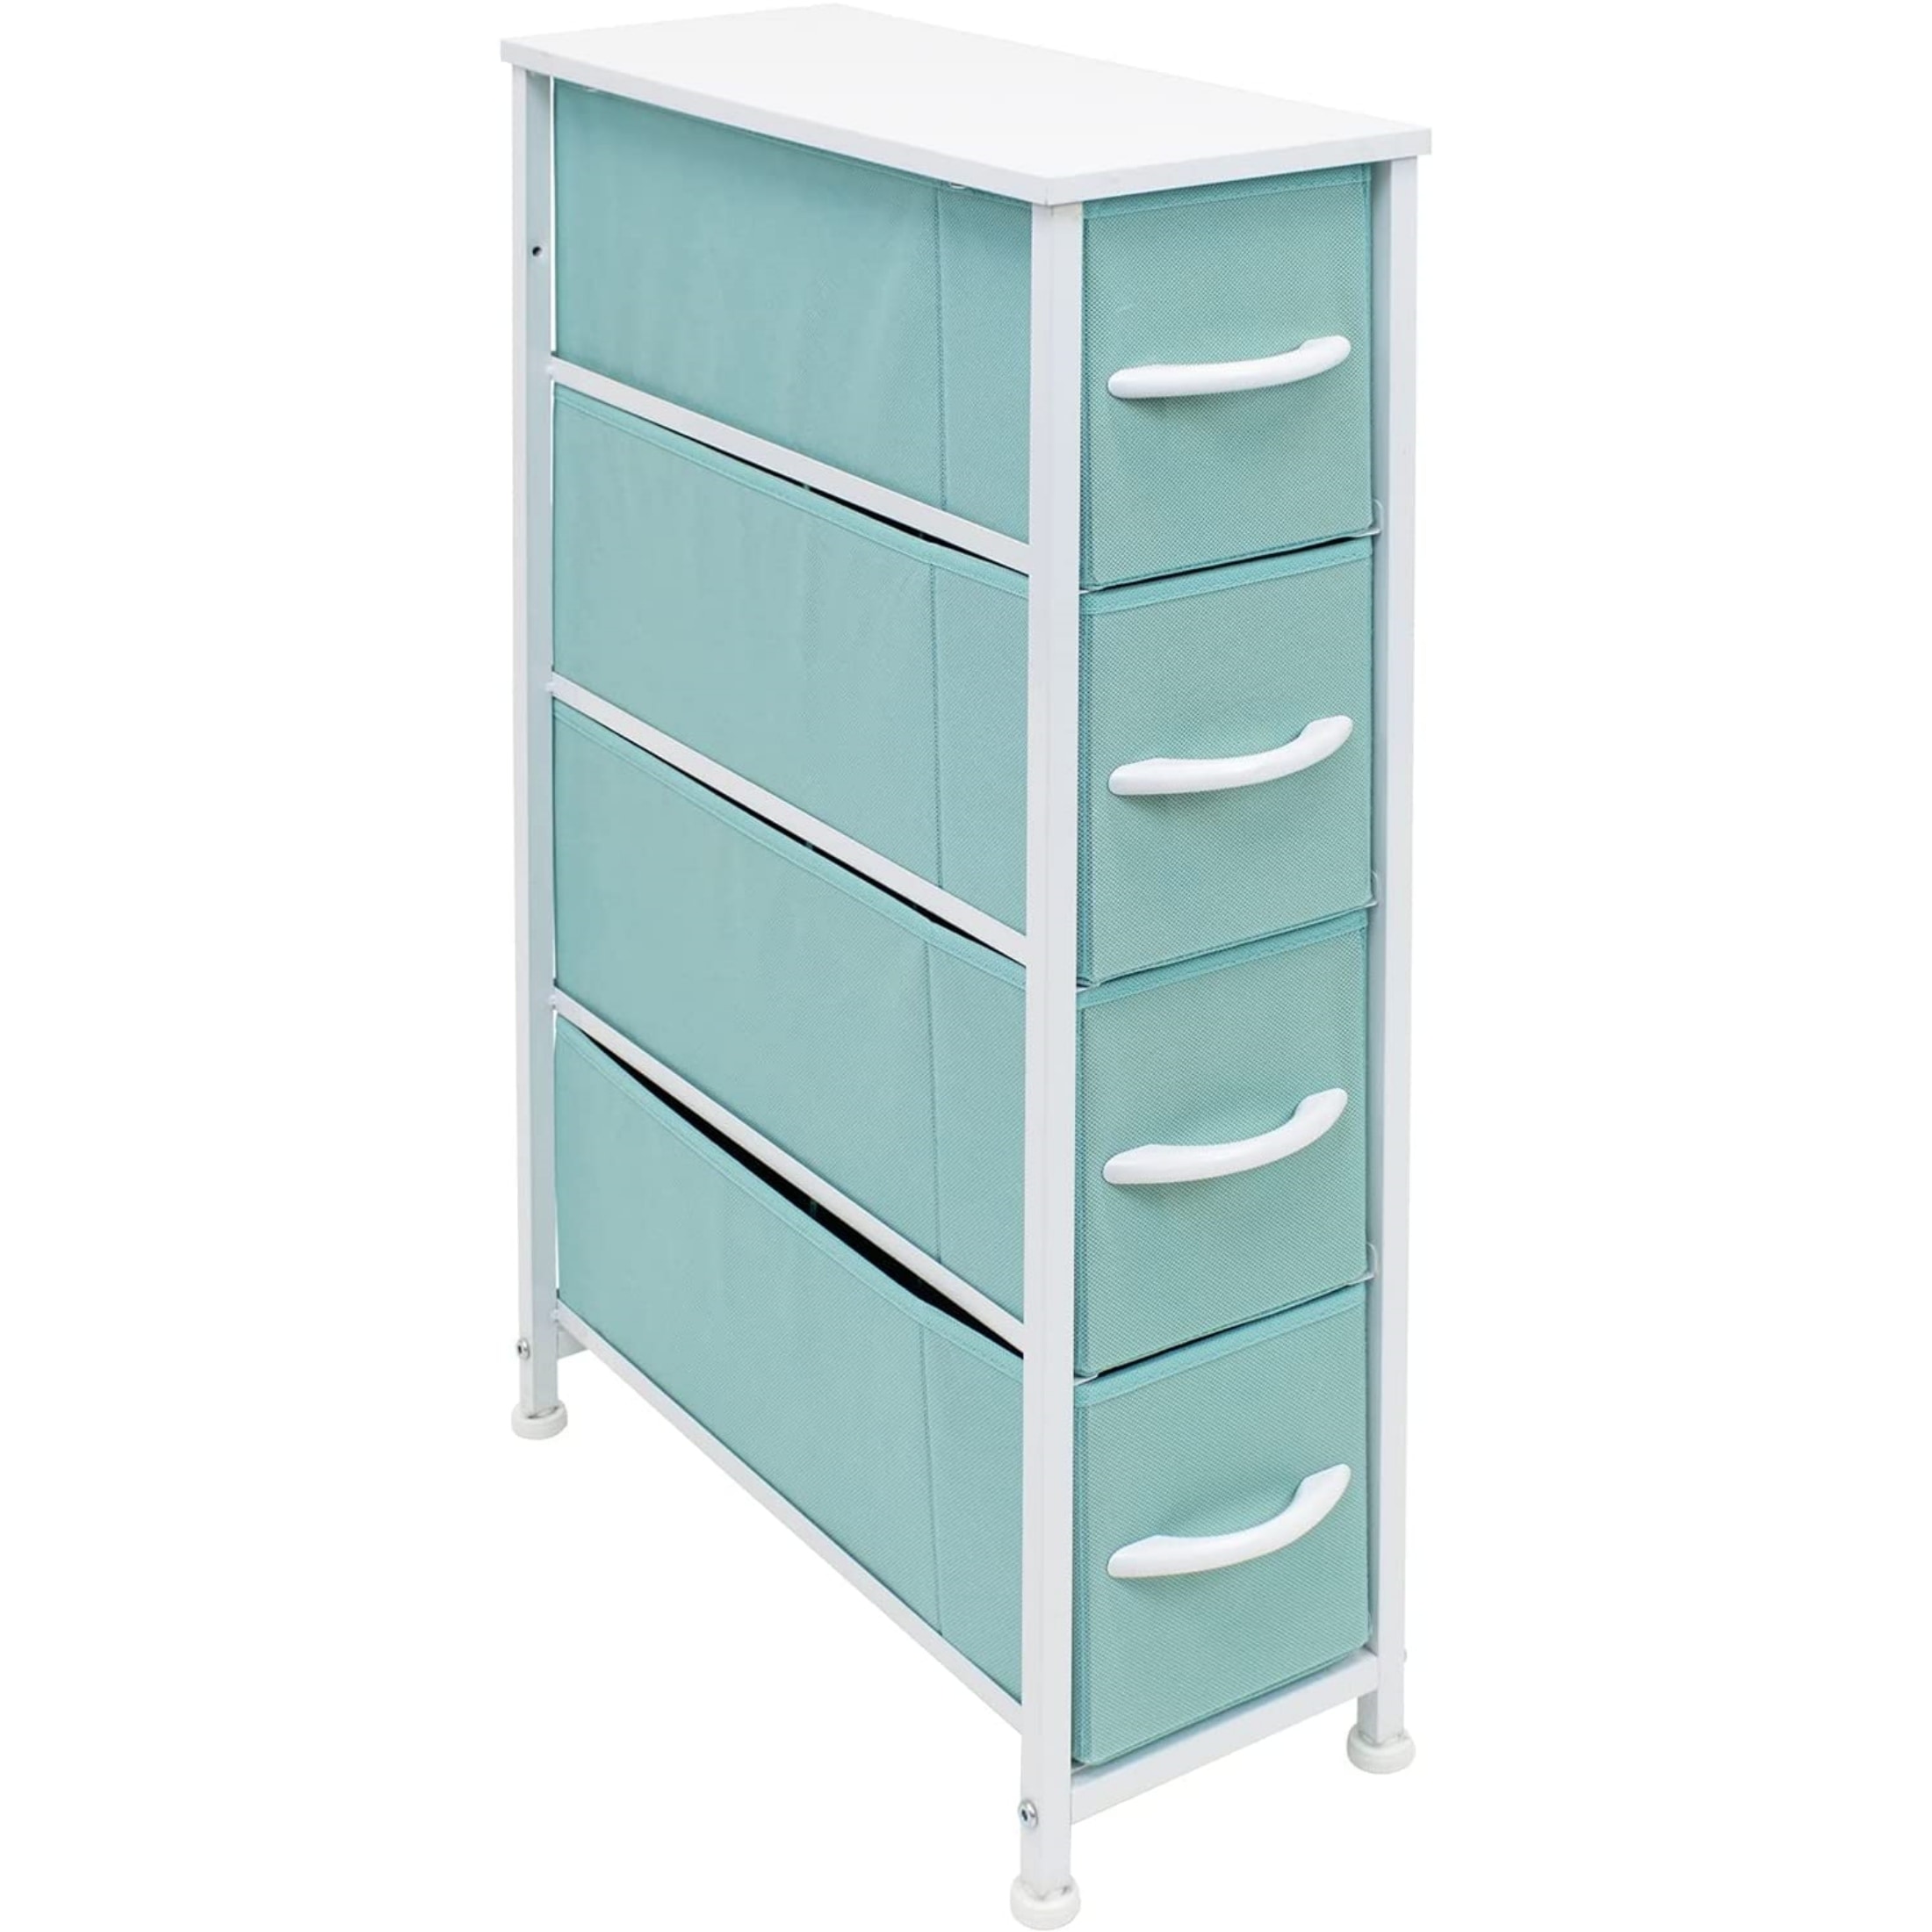 https://ak1.ostkcdn.com/images/products/is/images/direct/11aded00b8c1db80513666f259984df918c59cab/Narrow-Dresser-Tower-with-4-Drawers---Vertical-Storage-for-Bedroom.jpg